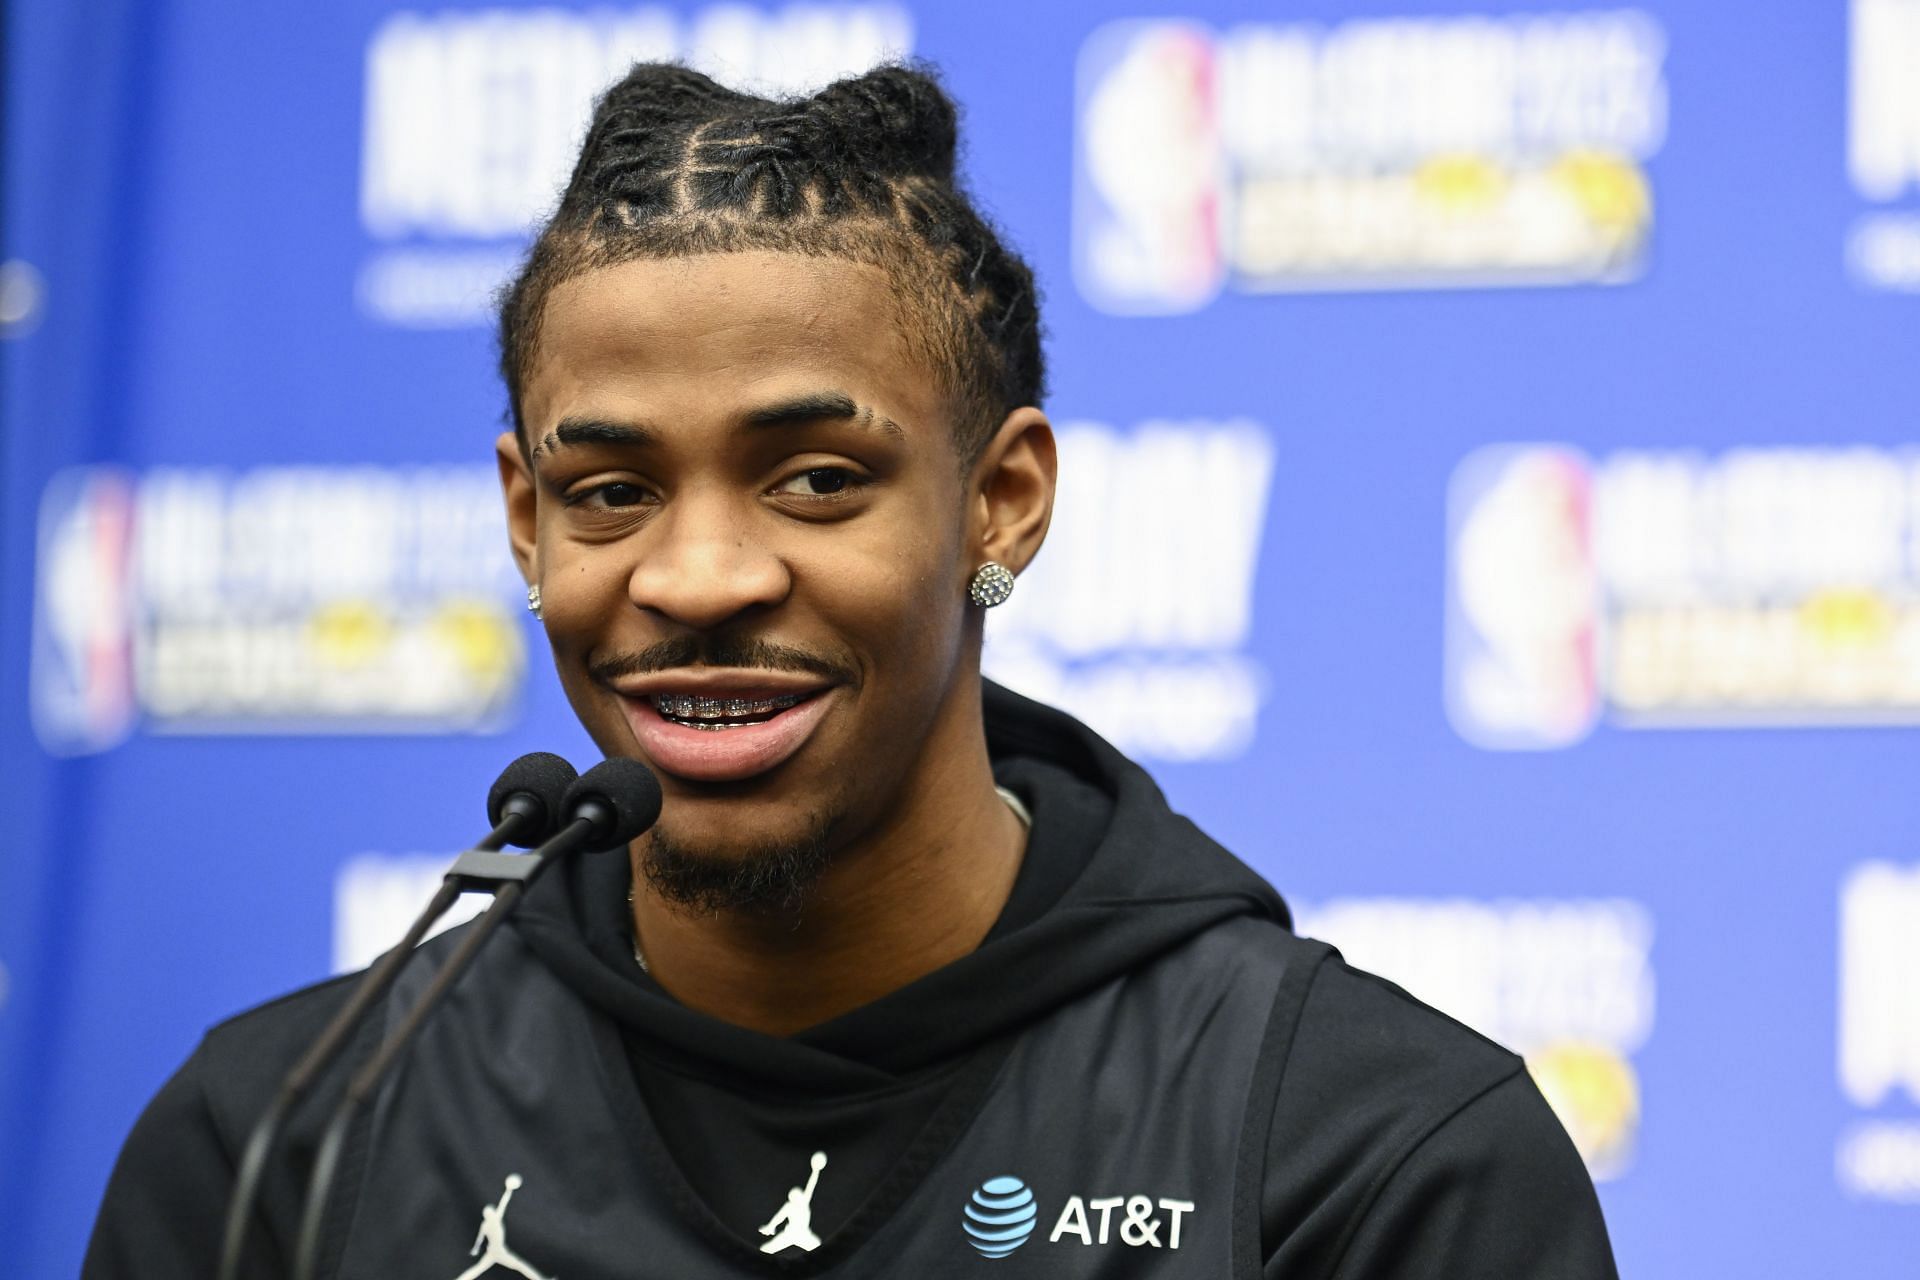 Ja Morant's ex-girlfriend: all you need to know about Kadre KK